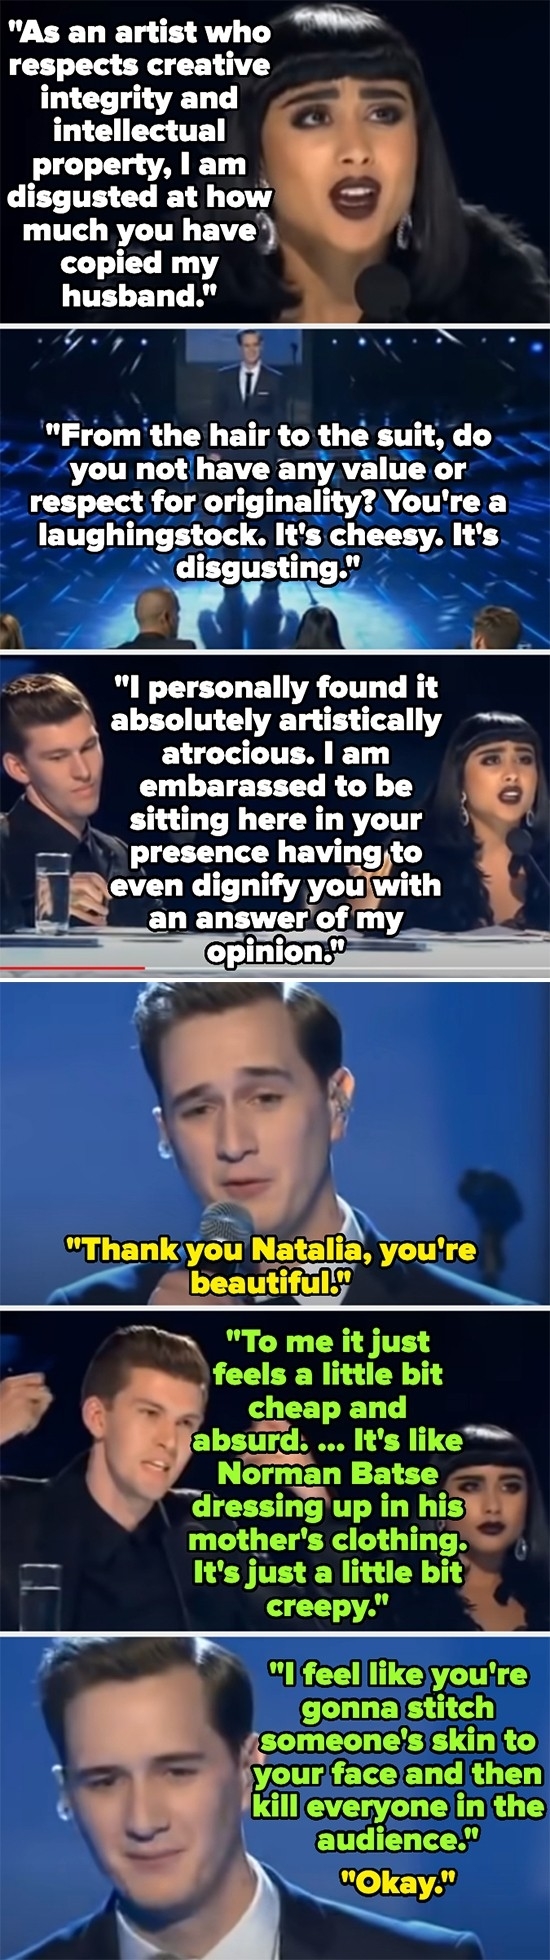 the two being mean about his appearance and calling him a copy of Willy Moon while the contestant stands on stage awkwardly